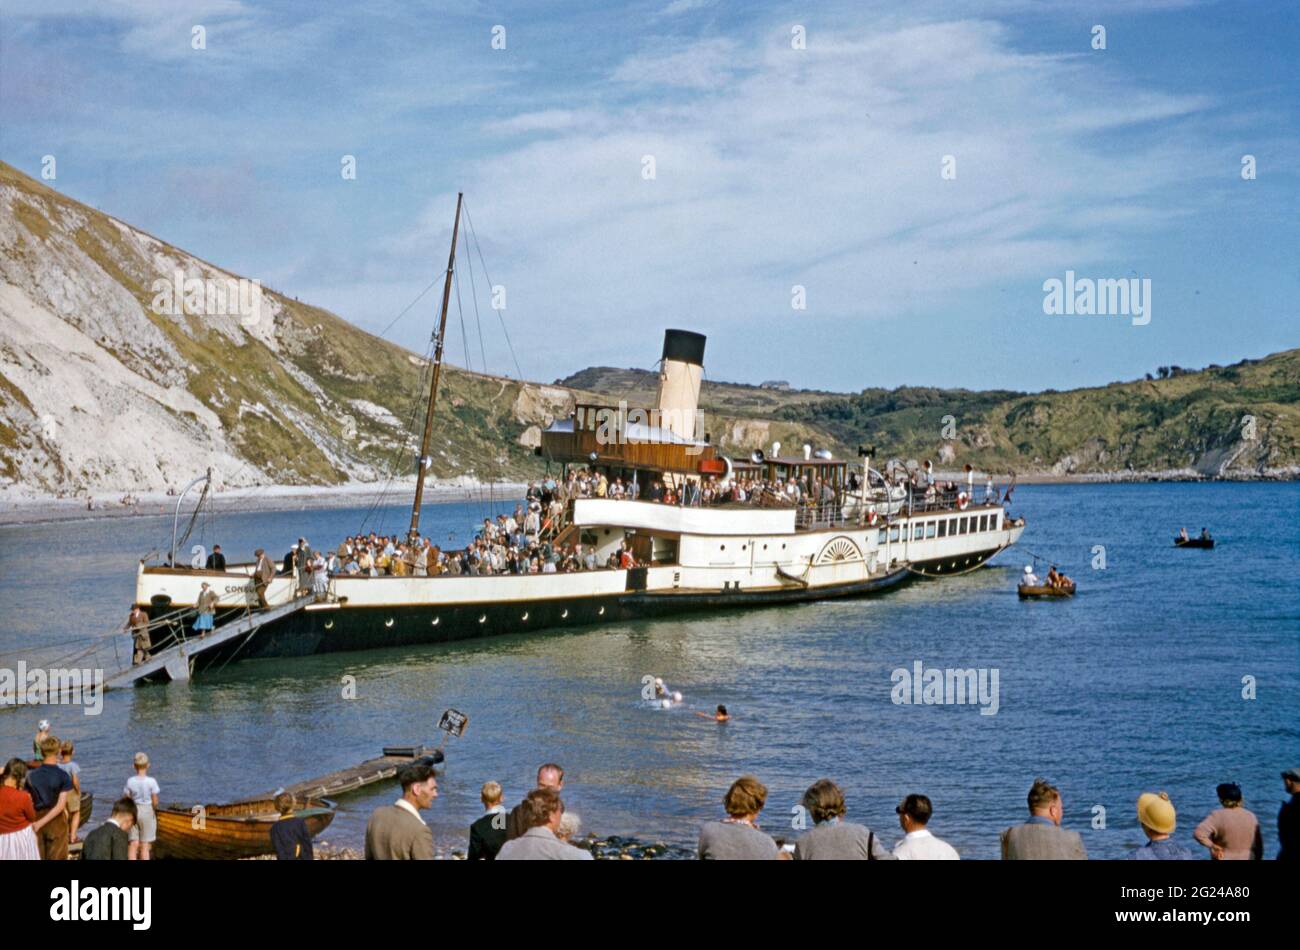 Paddle steamer ‘Consul’ with day trippers arriving from Weymouth disembarking at Lulworth Cove, Dorset, England, UK c. 1958. Lulworth Cove is near the village of West Lulworth, on the Jurassic Coast in southern England. The area is now a World Heritage Site. Consul was built in 1896 and was operated for many years by Cosens of Weymouth. Boats like Consul were designed to run up on the beach and unload passengers via a wooden gangway hinged from the bow. This image is from an old amateur 35mm colour transparency – a vintage 1950s photograph. Stock Photo